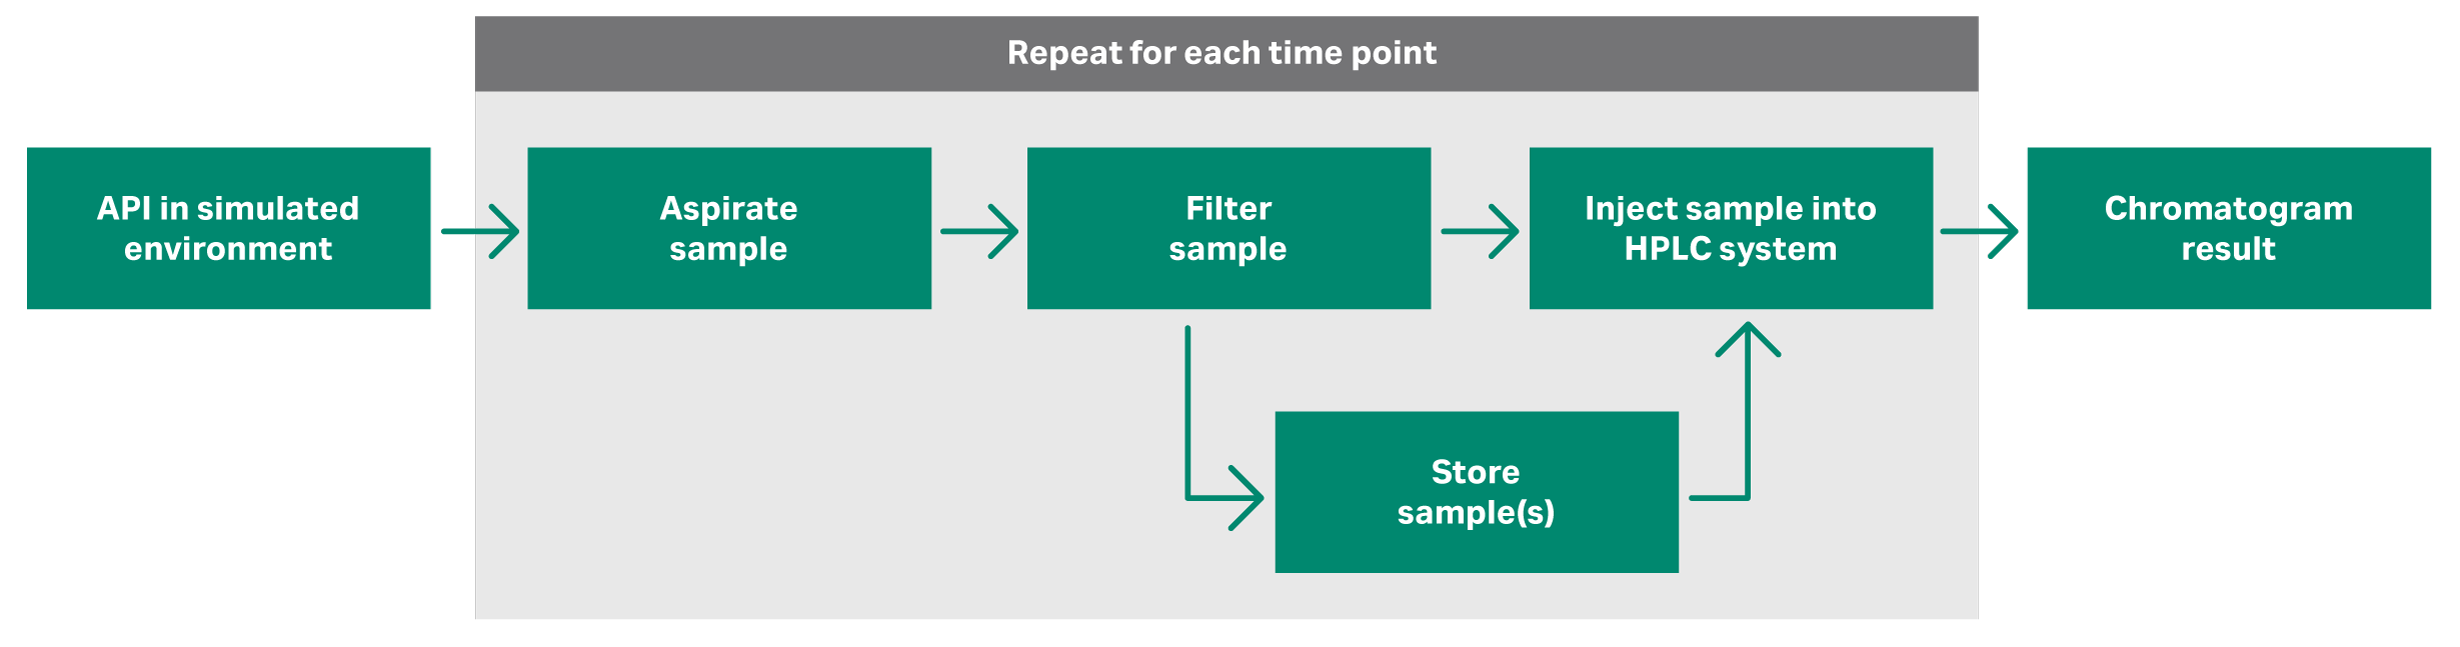 A typical dissolution sampling workflow